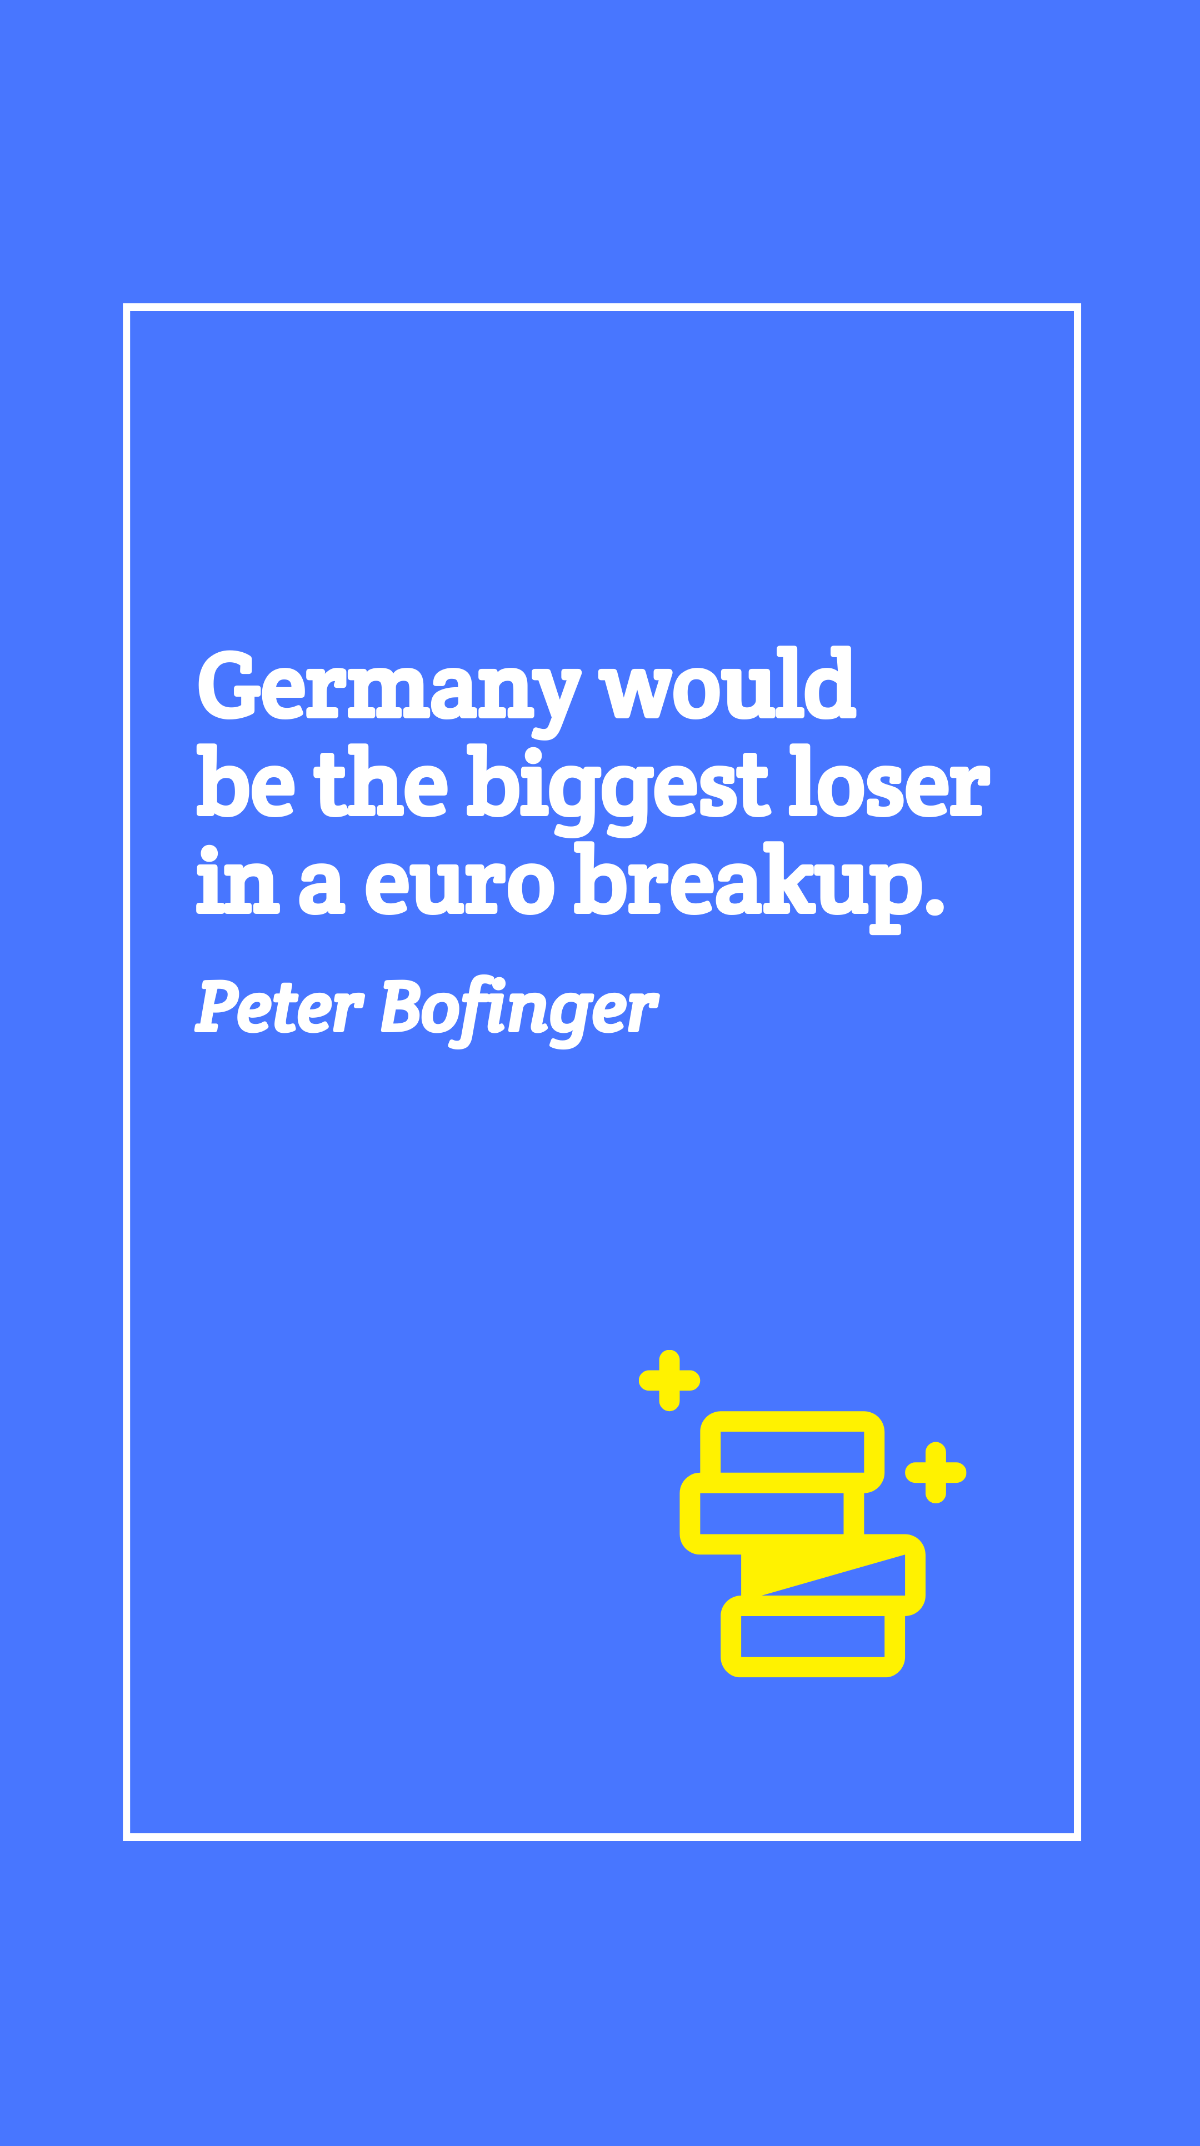 Peter Bofinger - Germany would be the biggest loser in a euro breakup.